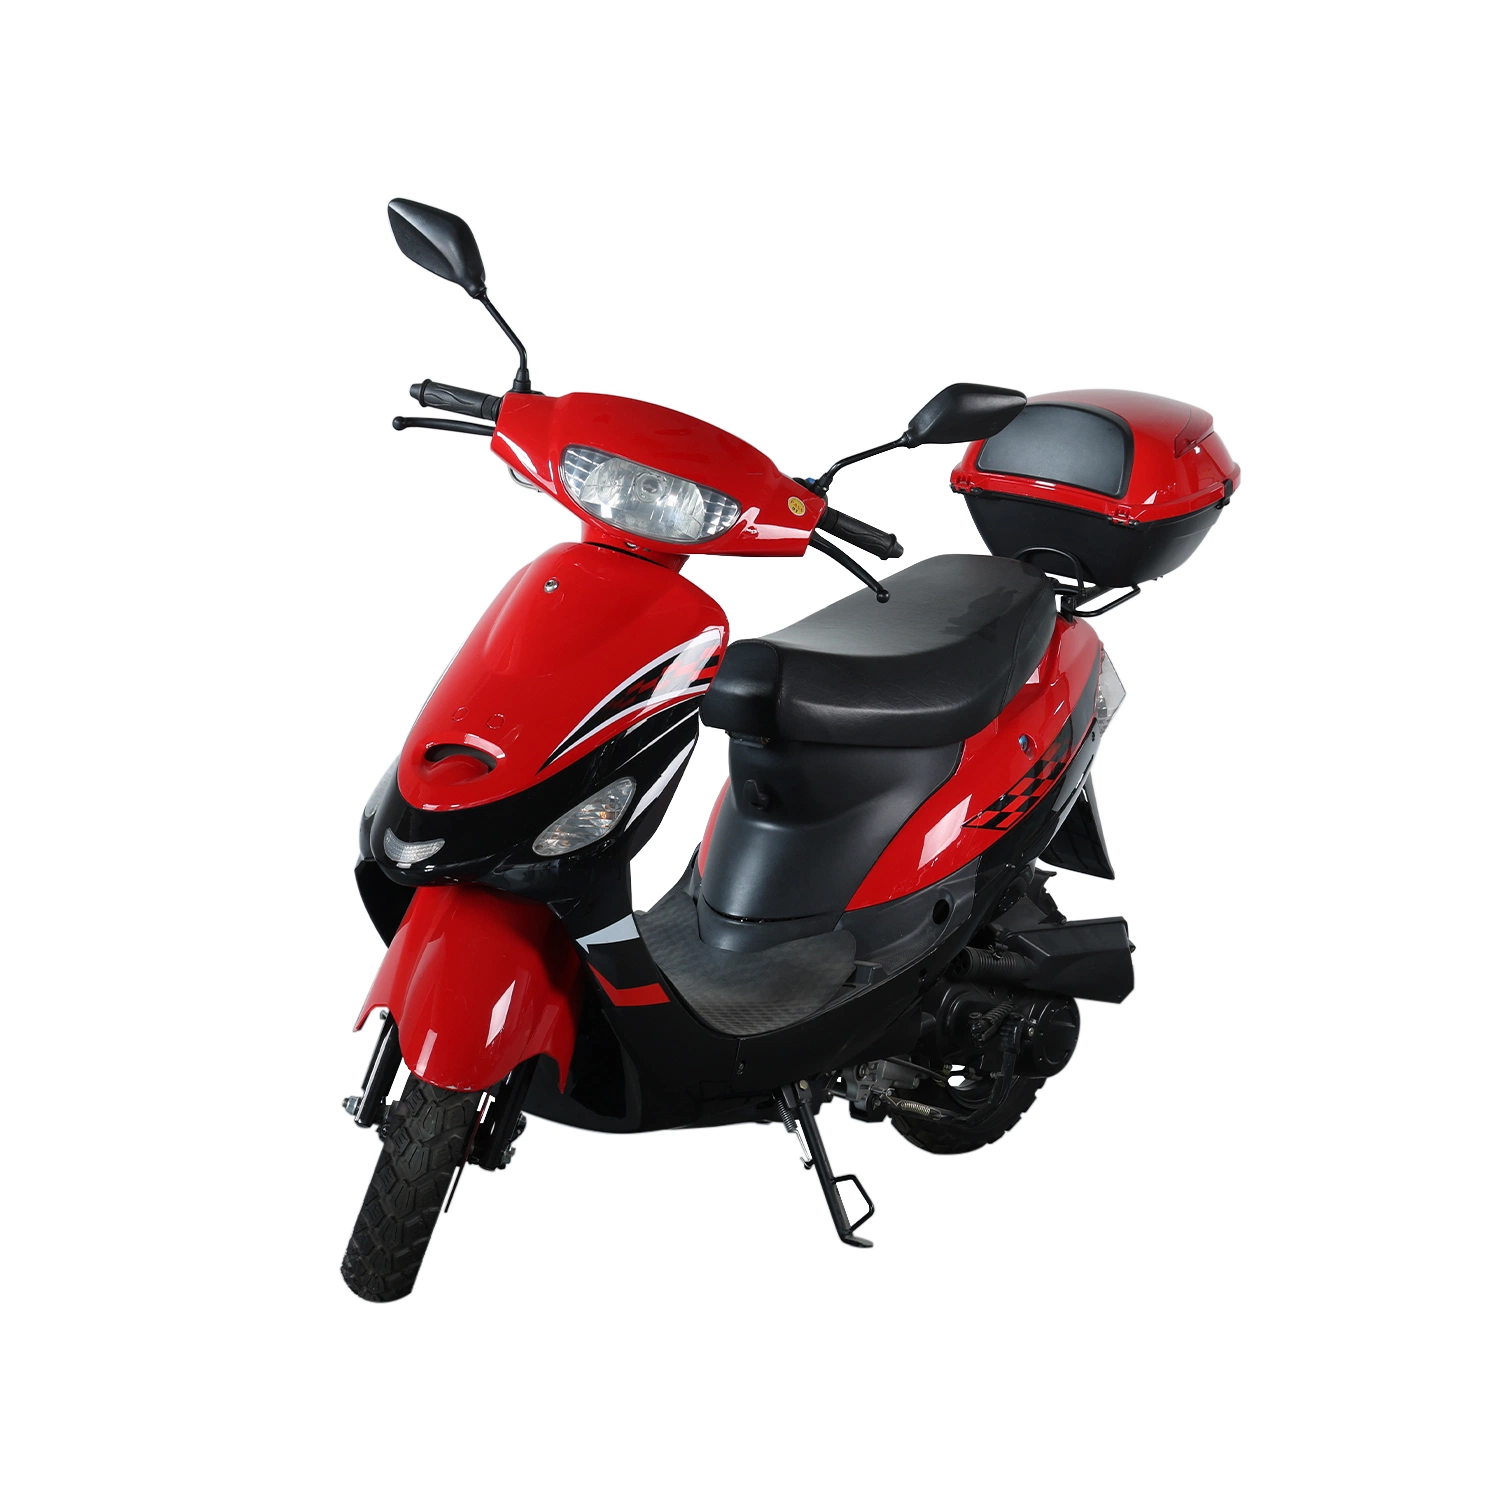 Xgy 50cc Motor Scooter, Gasoline Scooter, Motorcycle, Motorbike, Vehicle